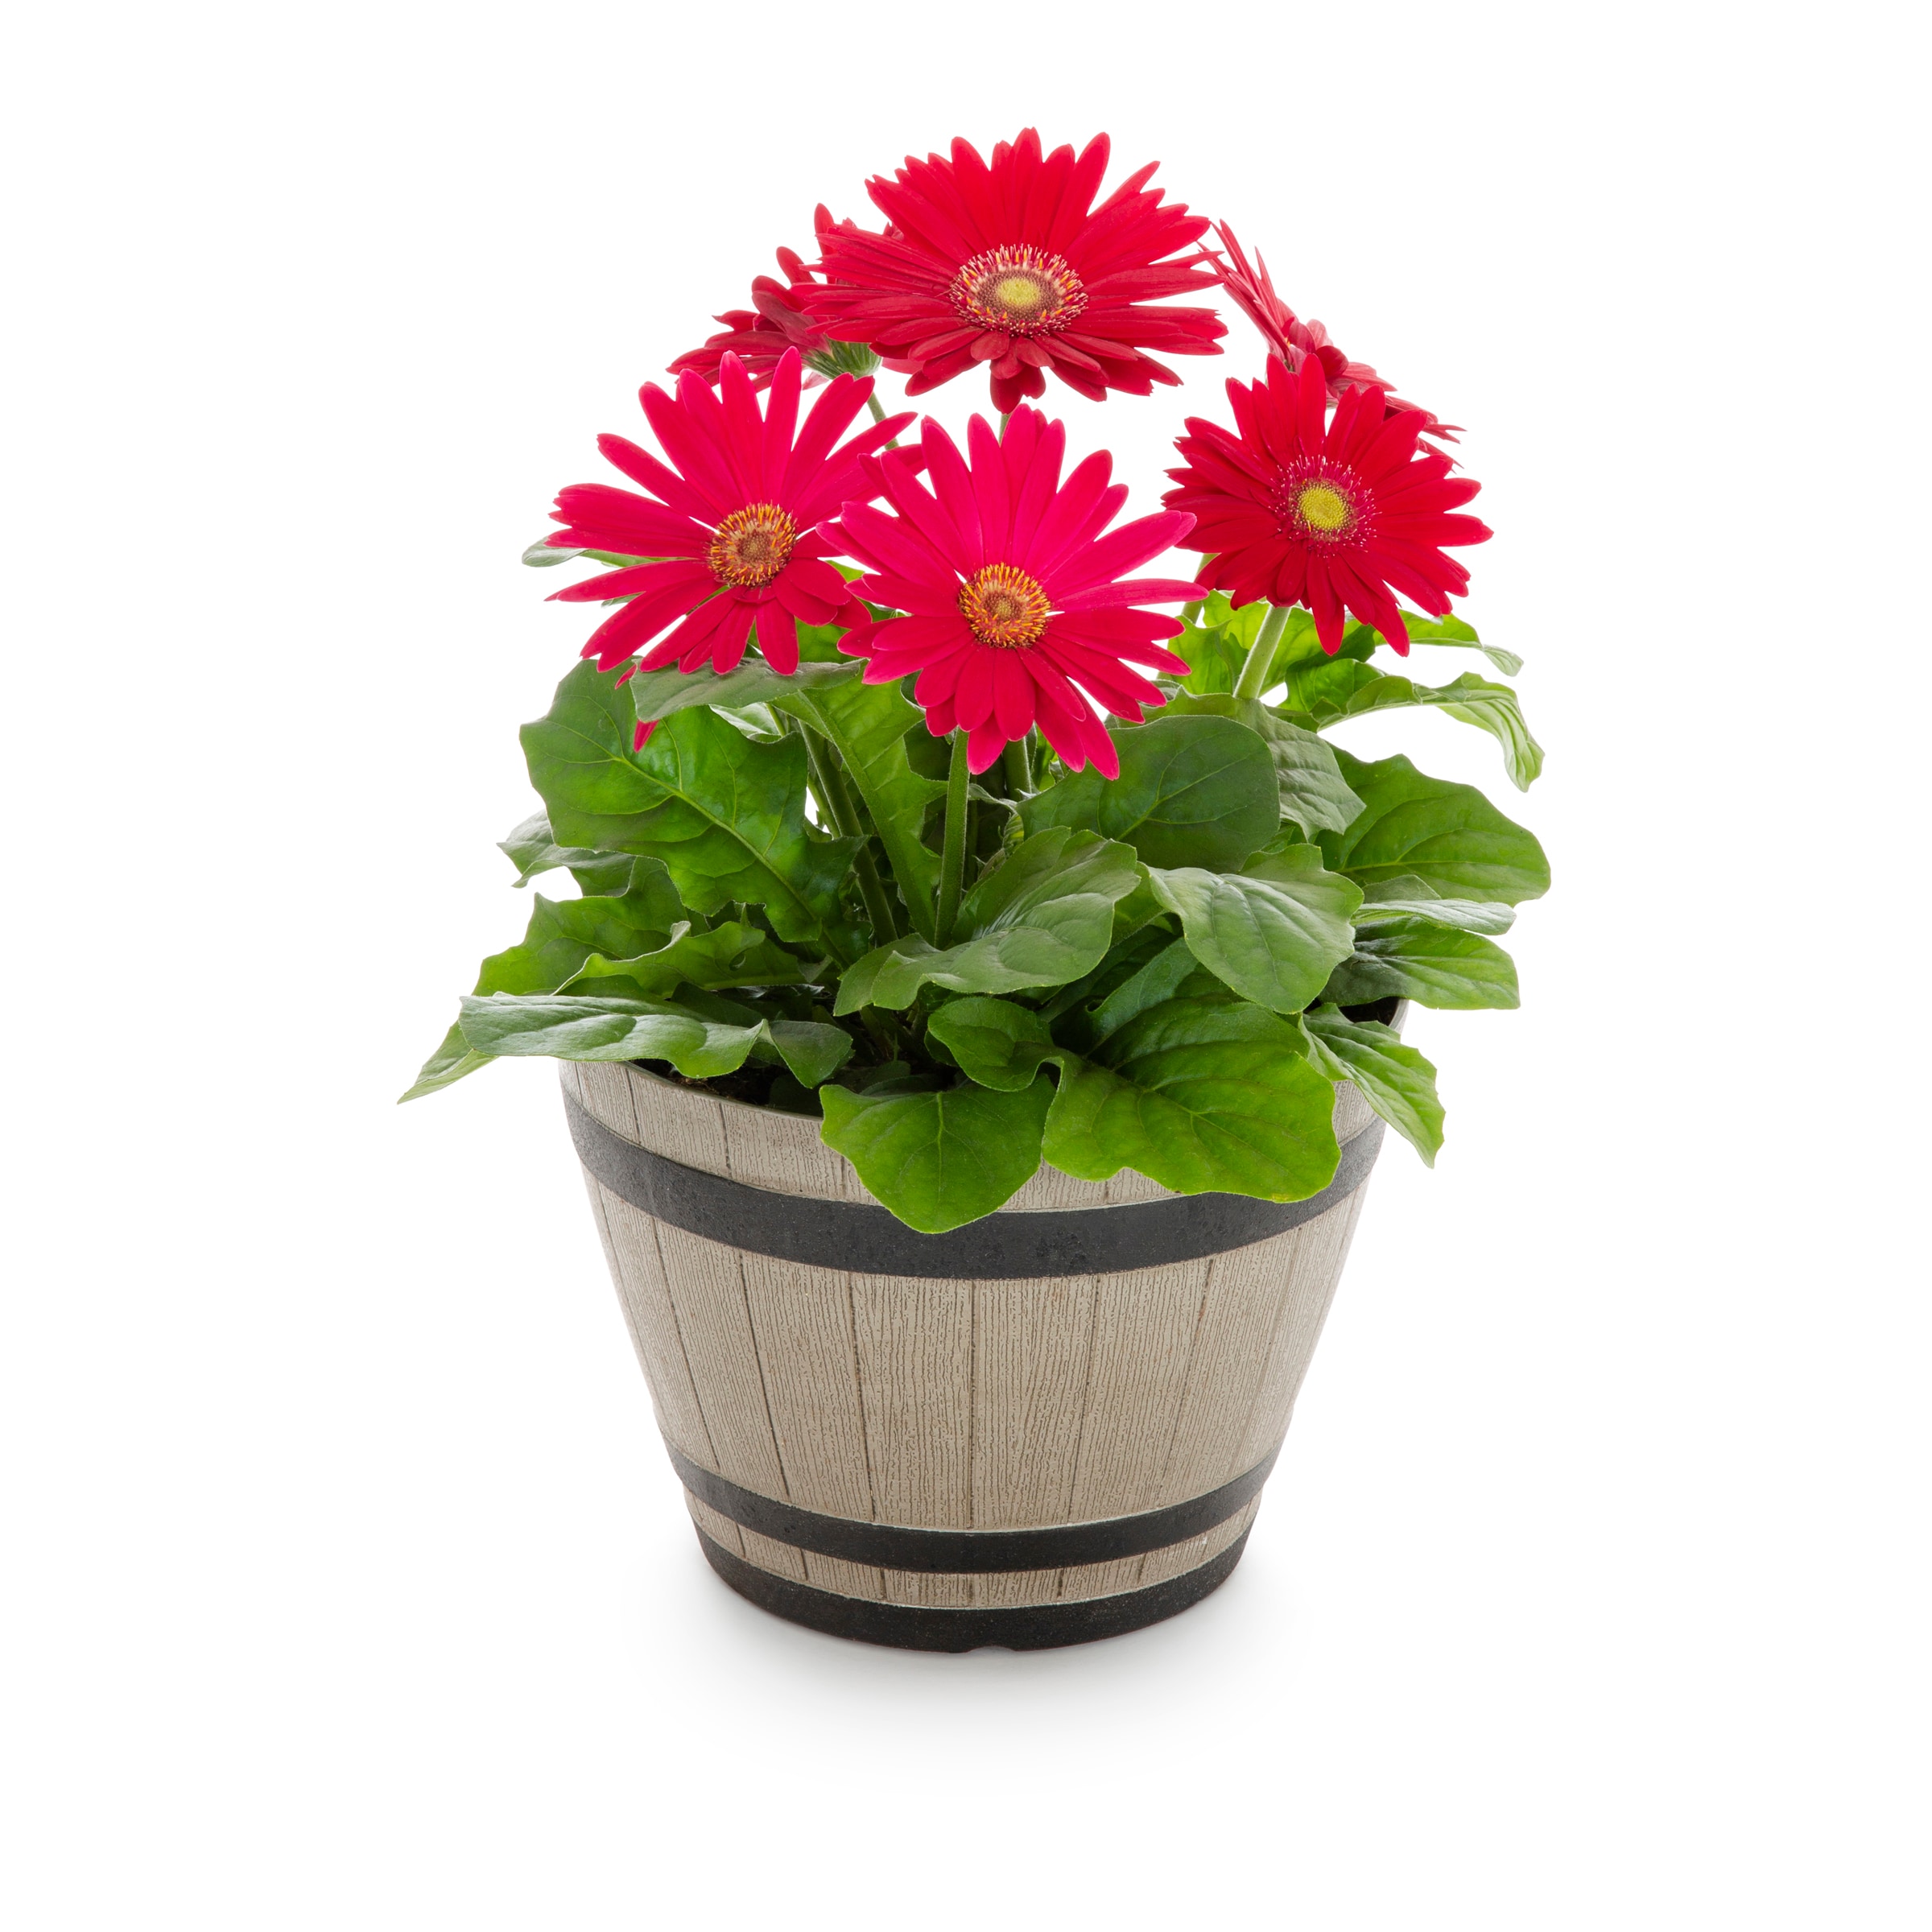 Lowe's Multicolor Gerbera Daisy in 1.15-Gallon (s) Planter in the department at Lowes.com